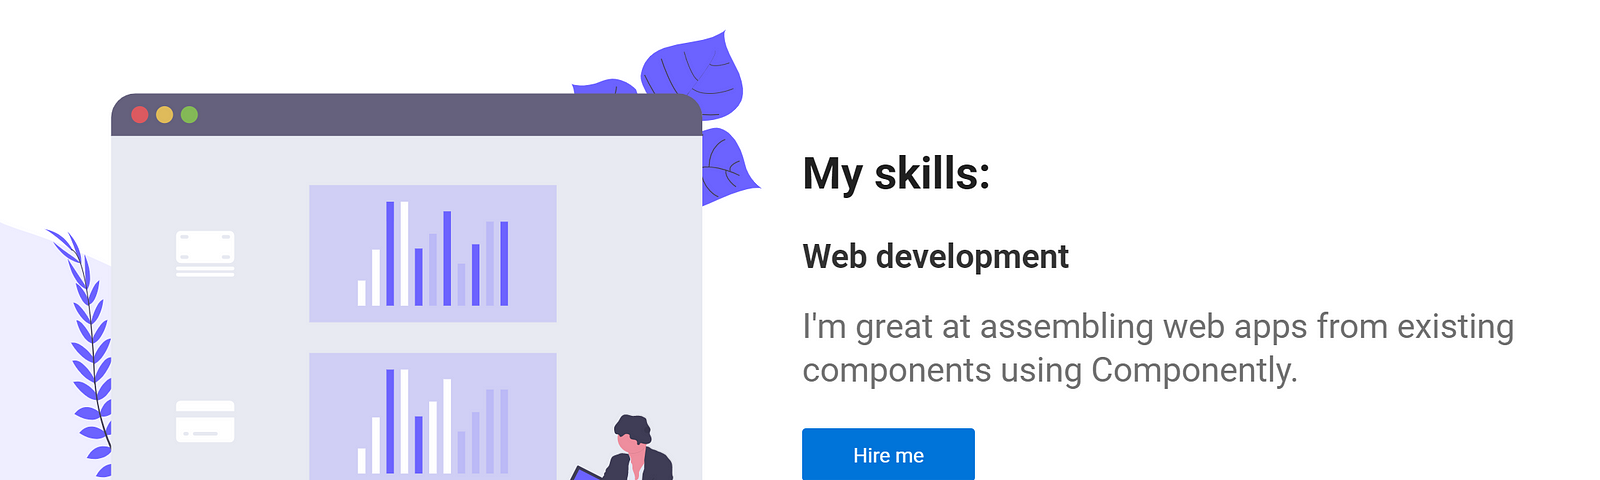 Portfolio example: “My skills: Web development — I’m great at assembling web apps from components using Componently”